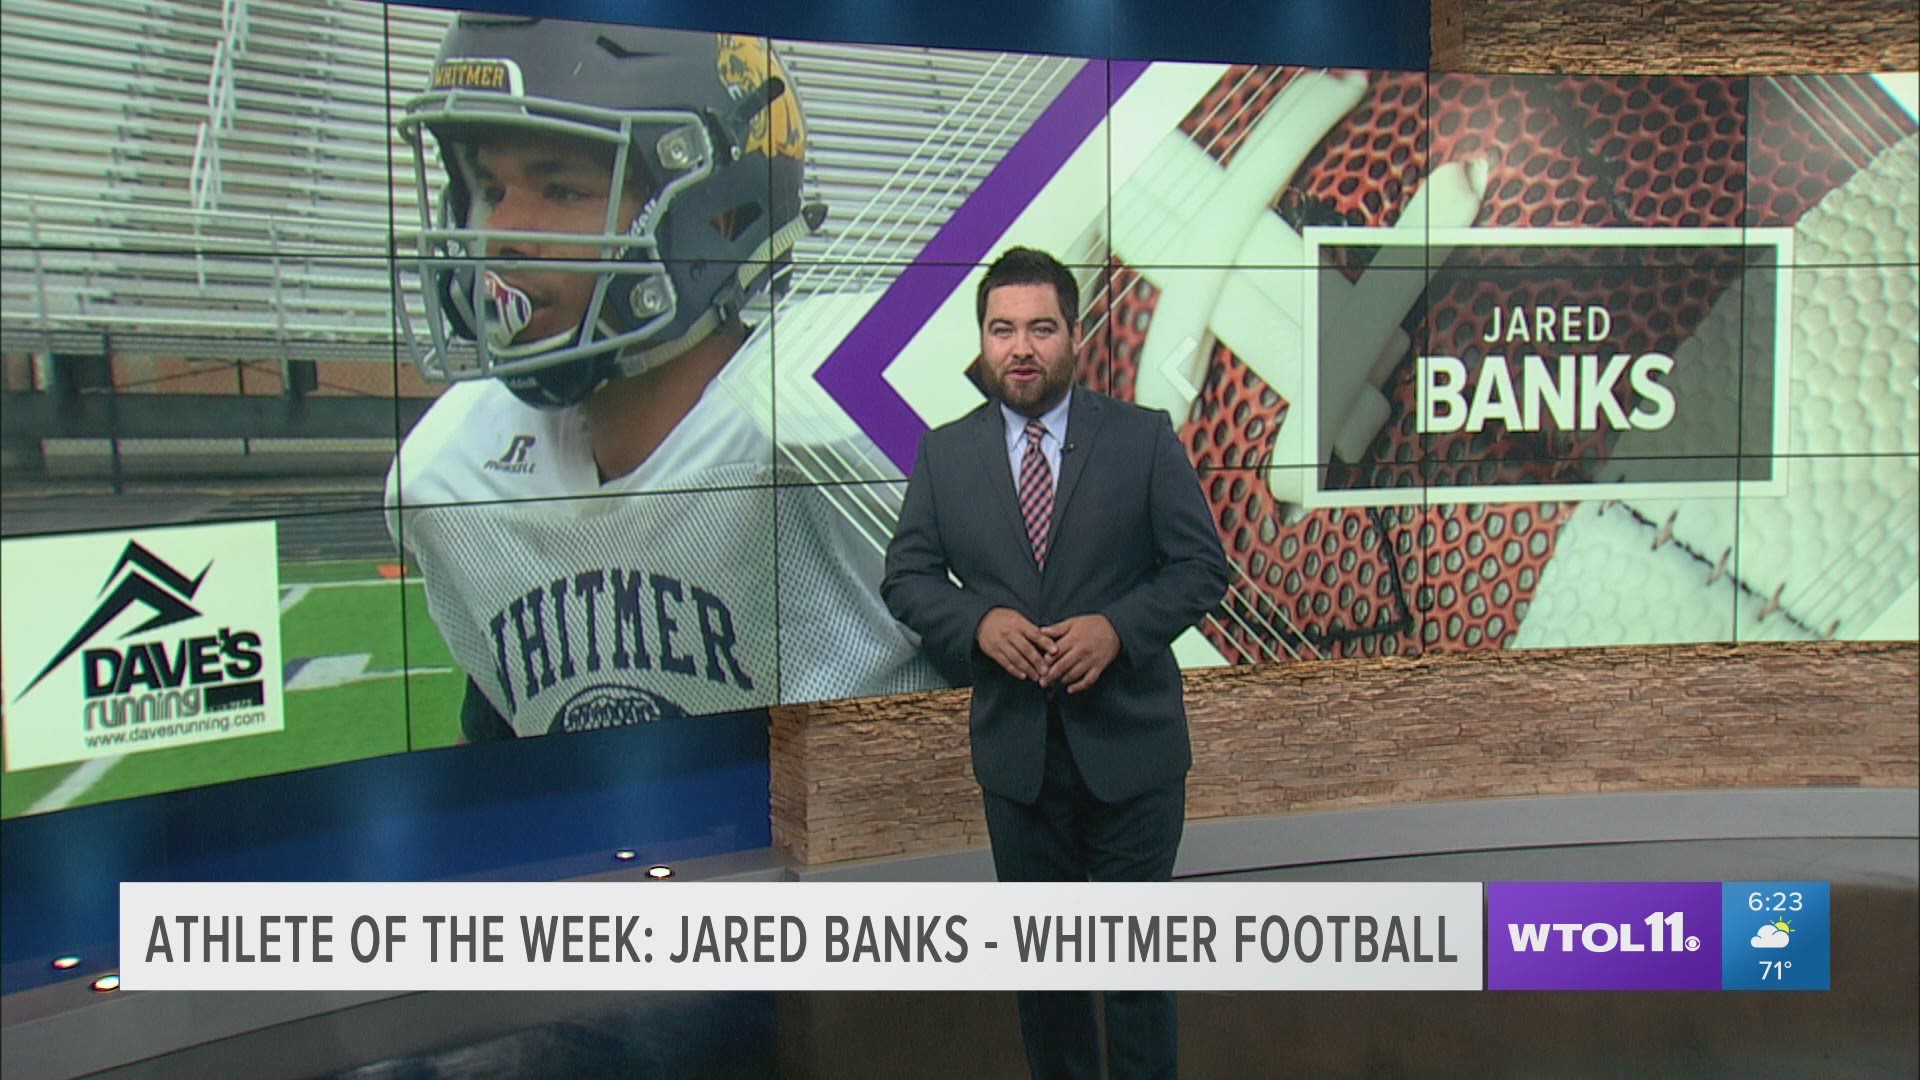 Banks on the carry" will be a familiar sound this year at Whitmer football games